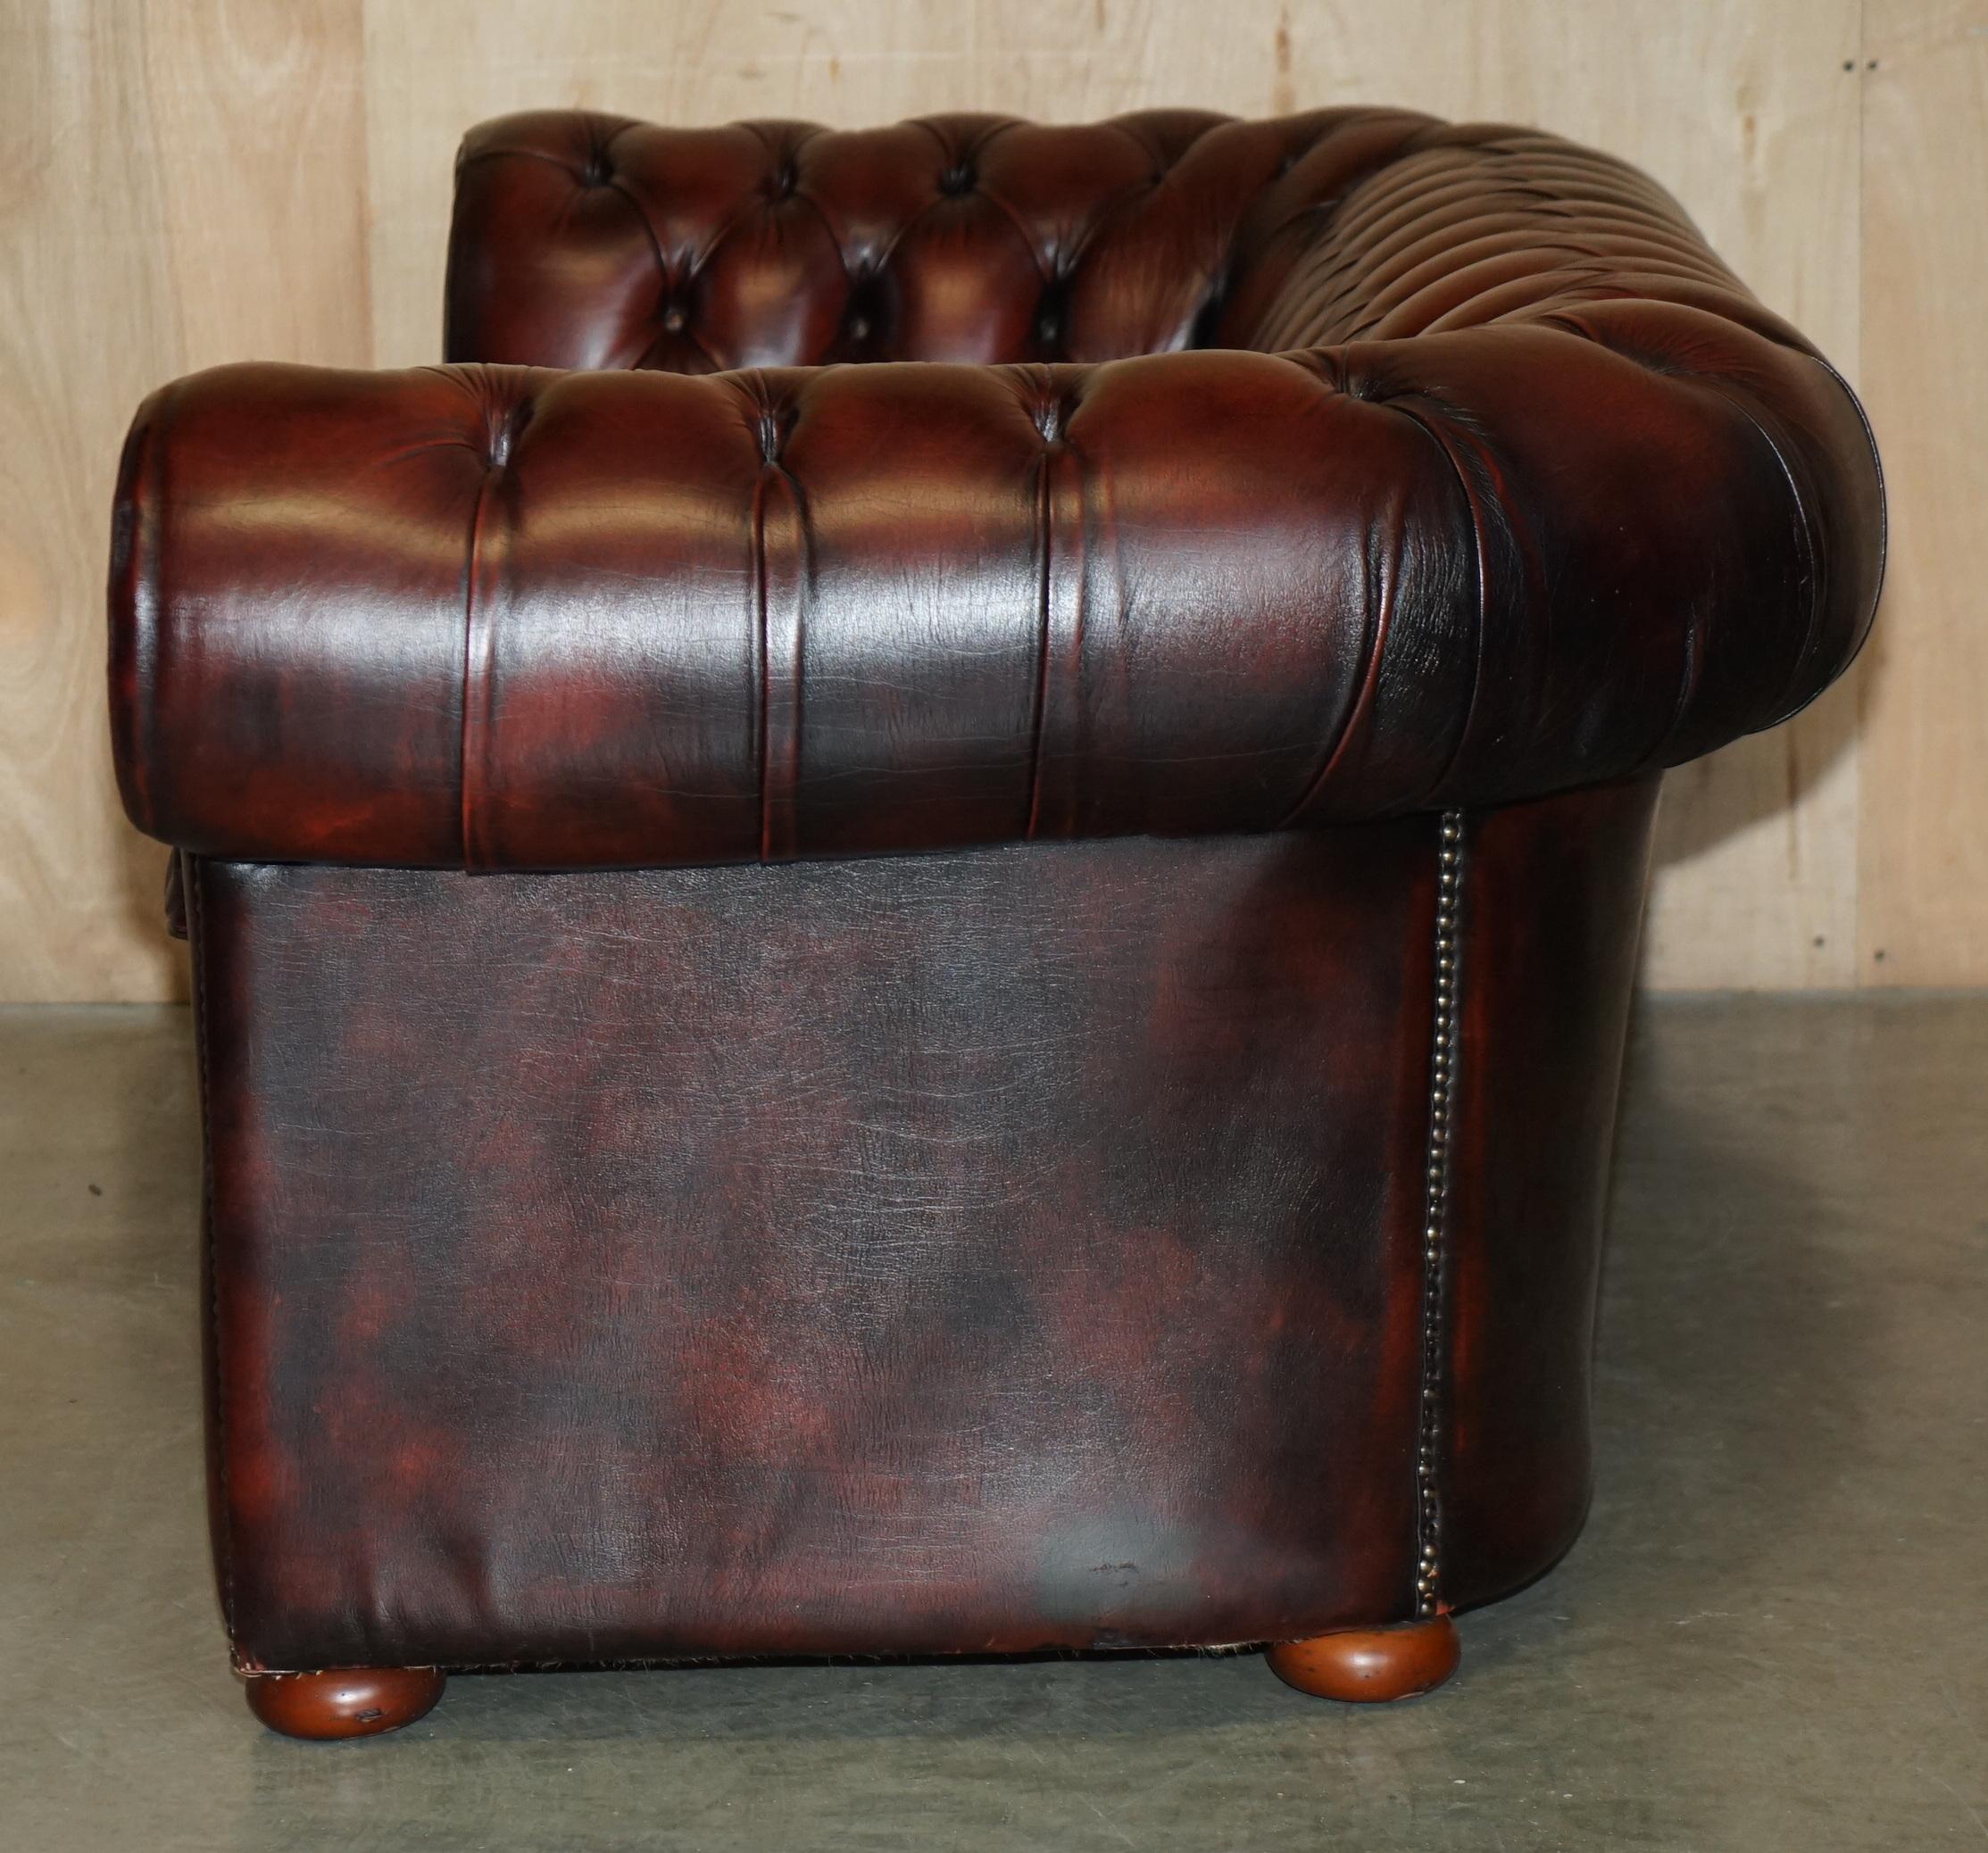 STUNNING FULLY RESTORED ENGLISH ViNTAGE BORDEAUX LEATHER CHESTERFIELD CLUB SOFA For Sale 11